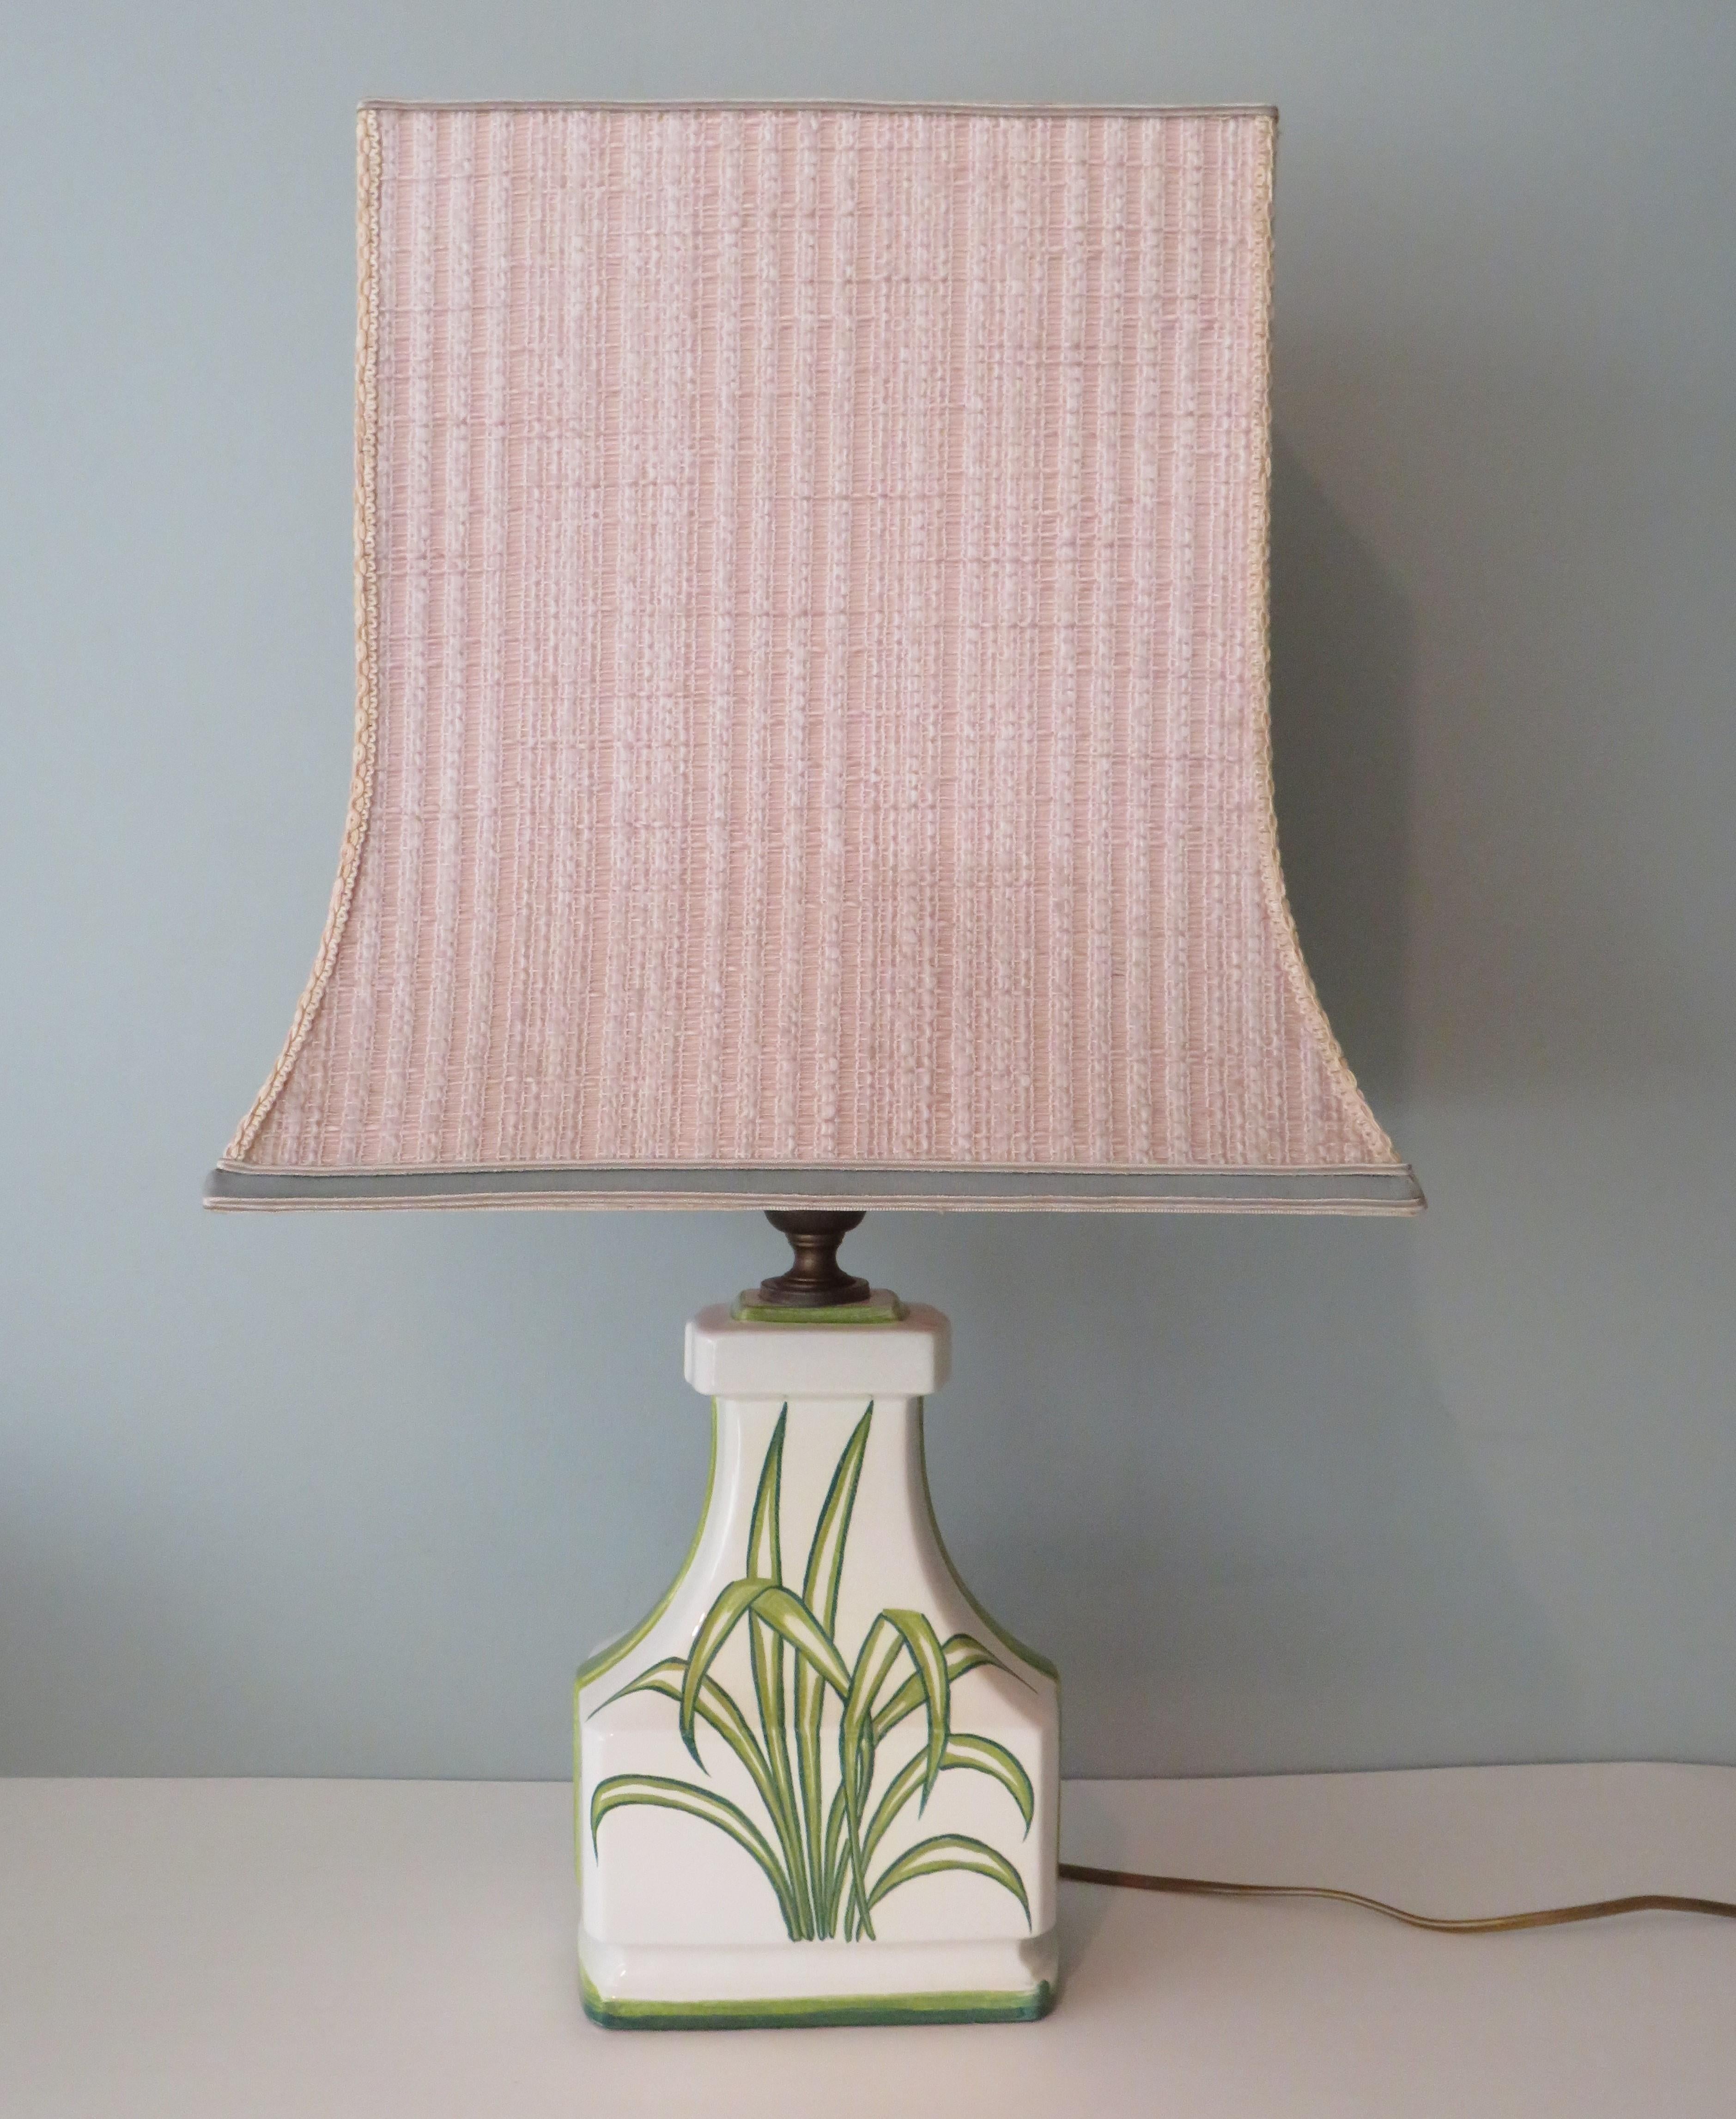 Large white ceramic table lamp with a palm leaf motif in different shades of green.
The lamp has a brass armature and a pagoda shaped lamp shade. The shade is made of ecru woven fabric and trimmed with velvet.
The cord, the on and off button and